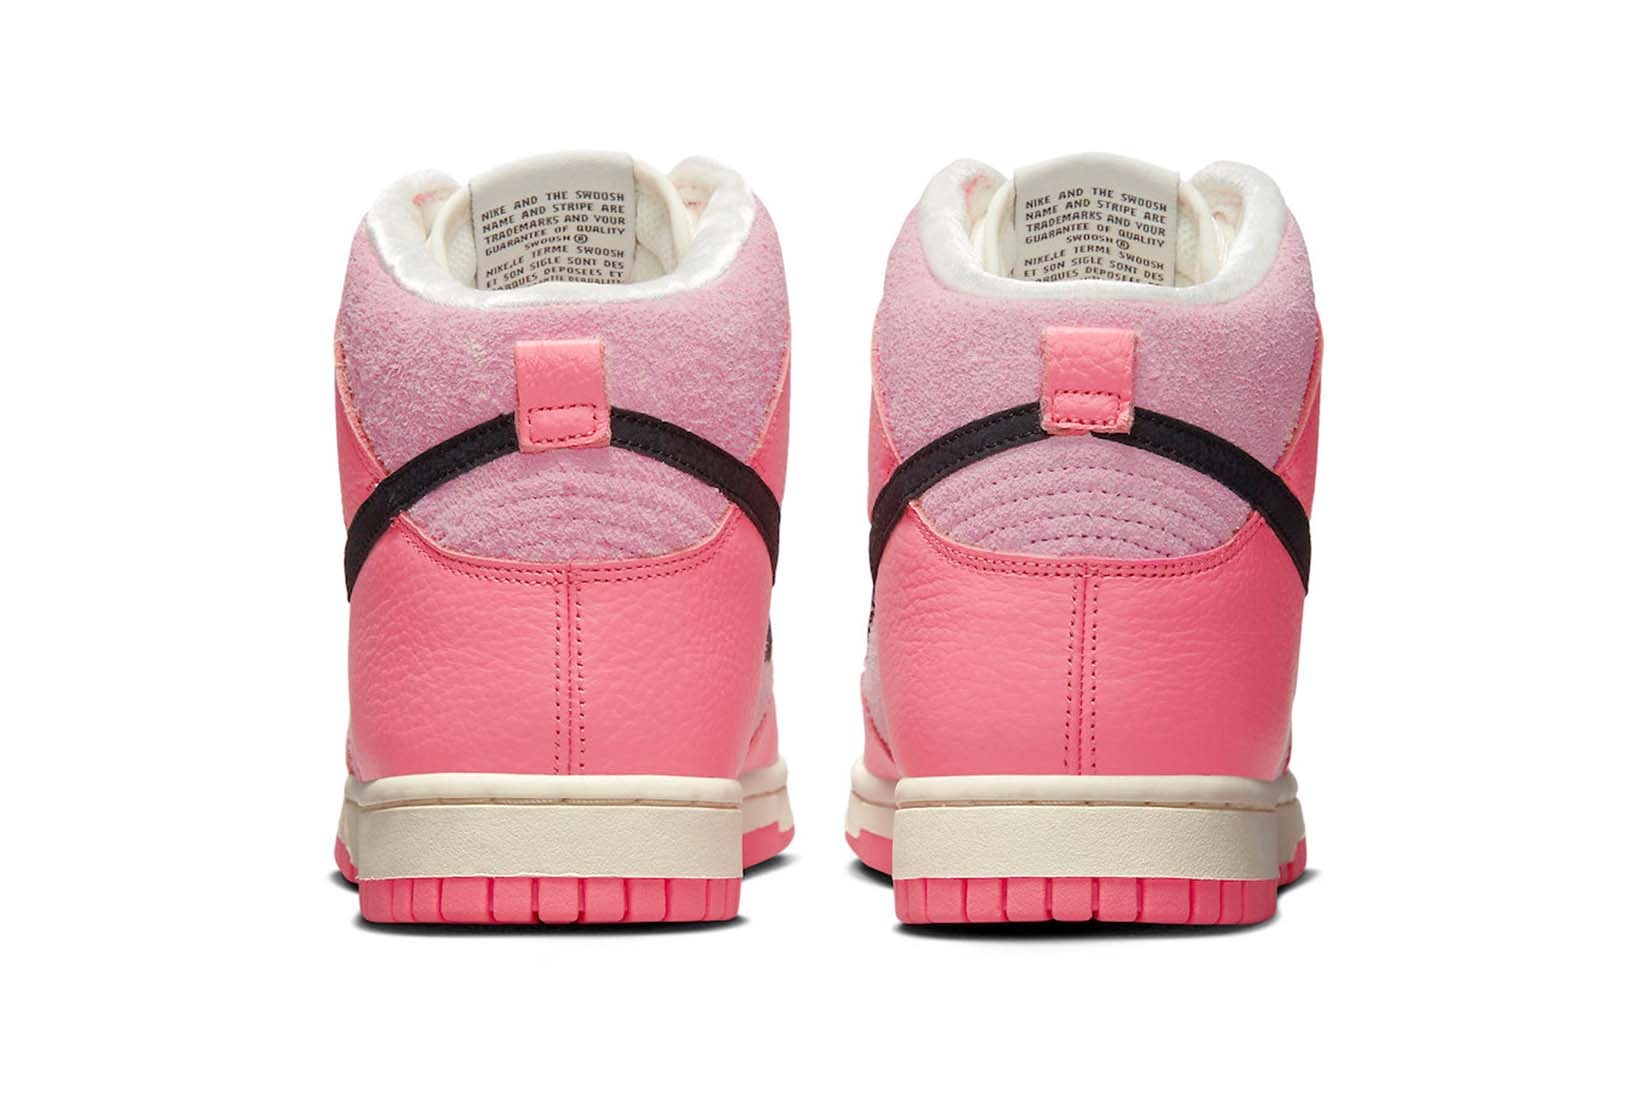 Nike Dunk High Hoops Pink DX3359-600 Price Release Info